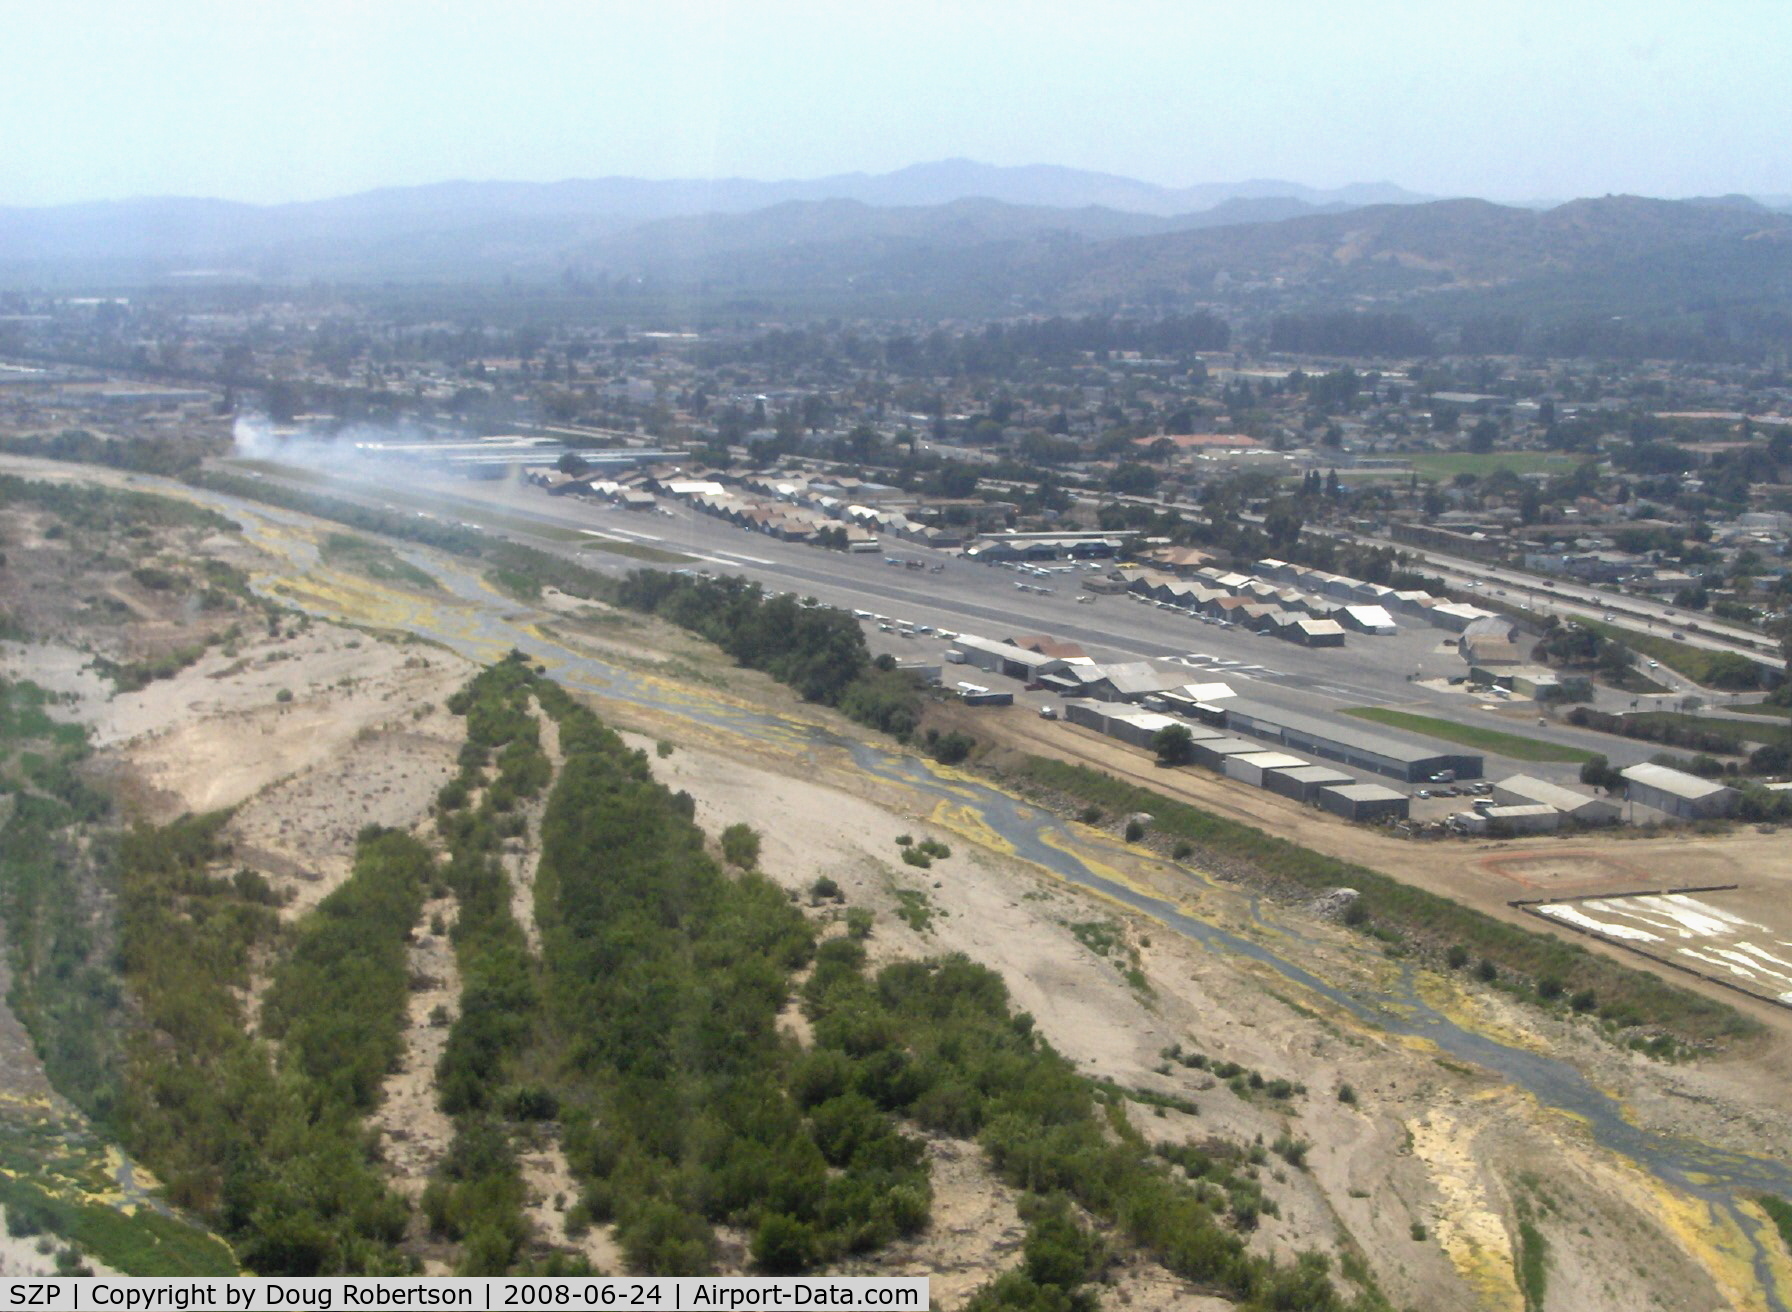 Santa Paula Airport (SZP) - Turning base for Rwy 22, off airport fire smoke in distance. Note: fire was burning brush, not an aircraft accident